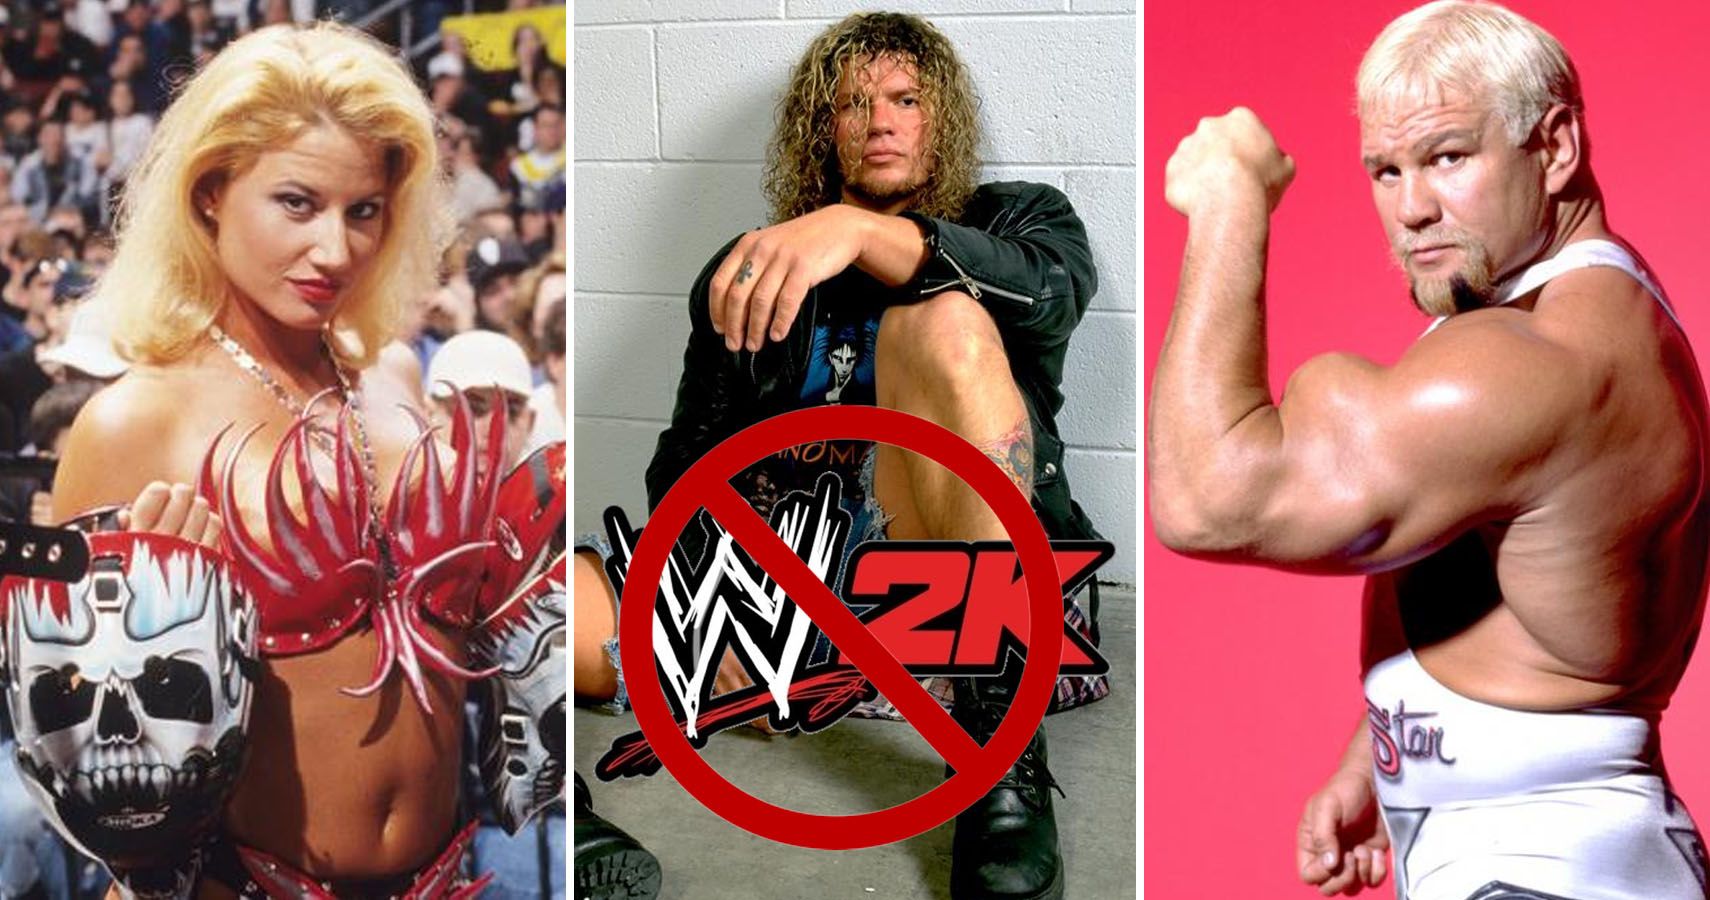 Guerrero Wwe And Xxx Video - Wrestlers That Are Banned From WWE Video Games | TheSportster